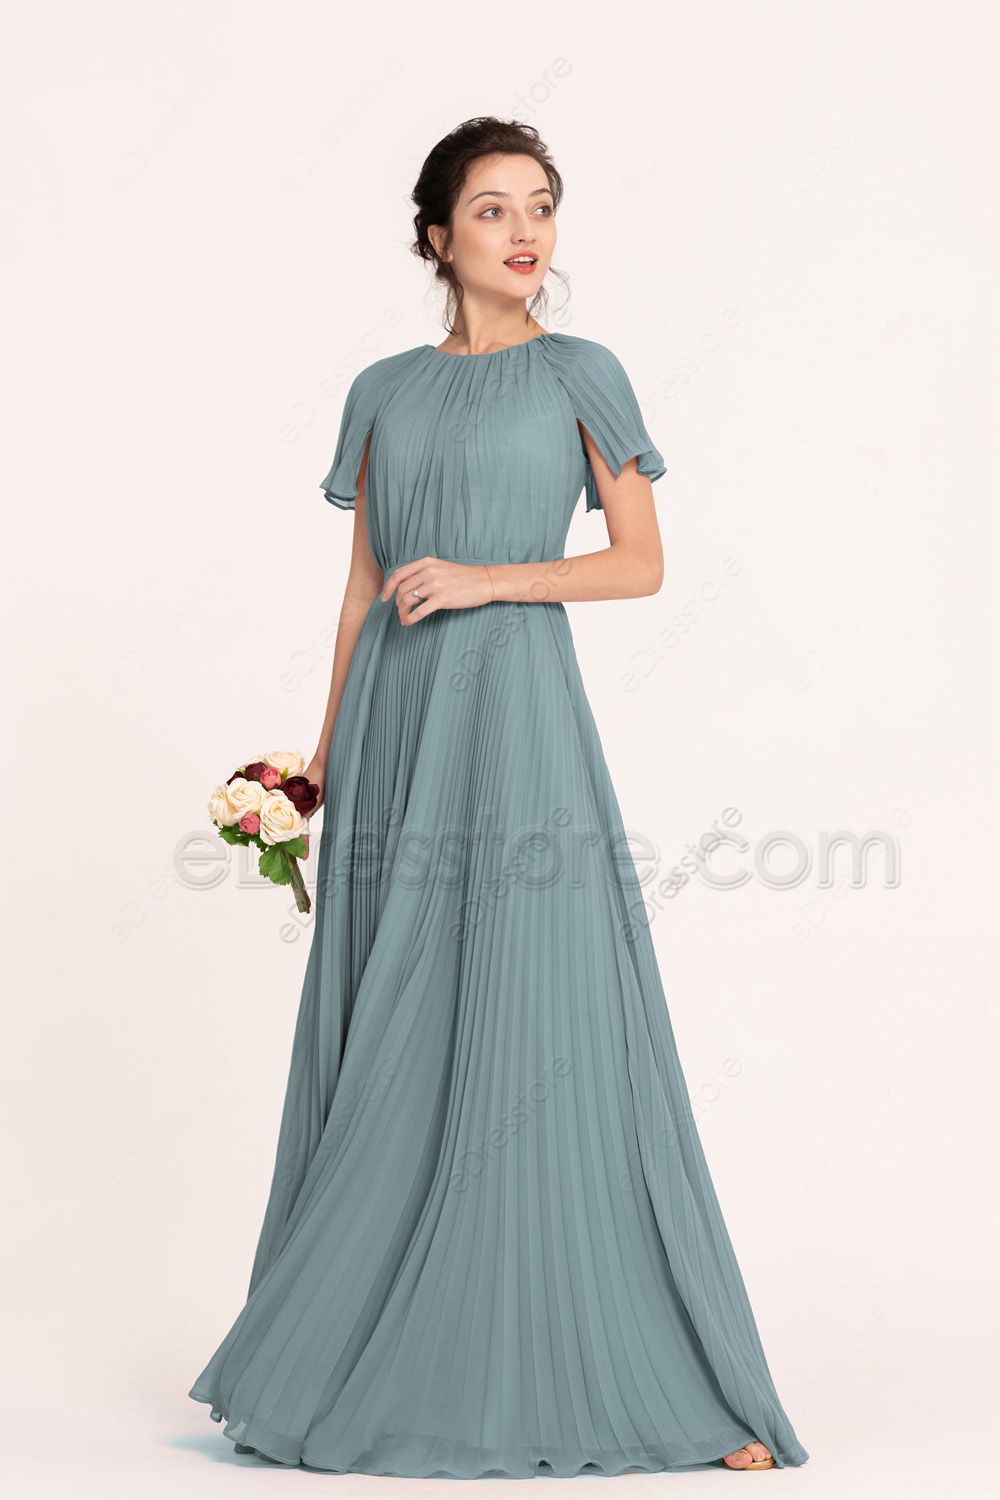 sage green mother of the bride dress